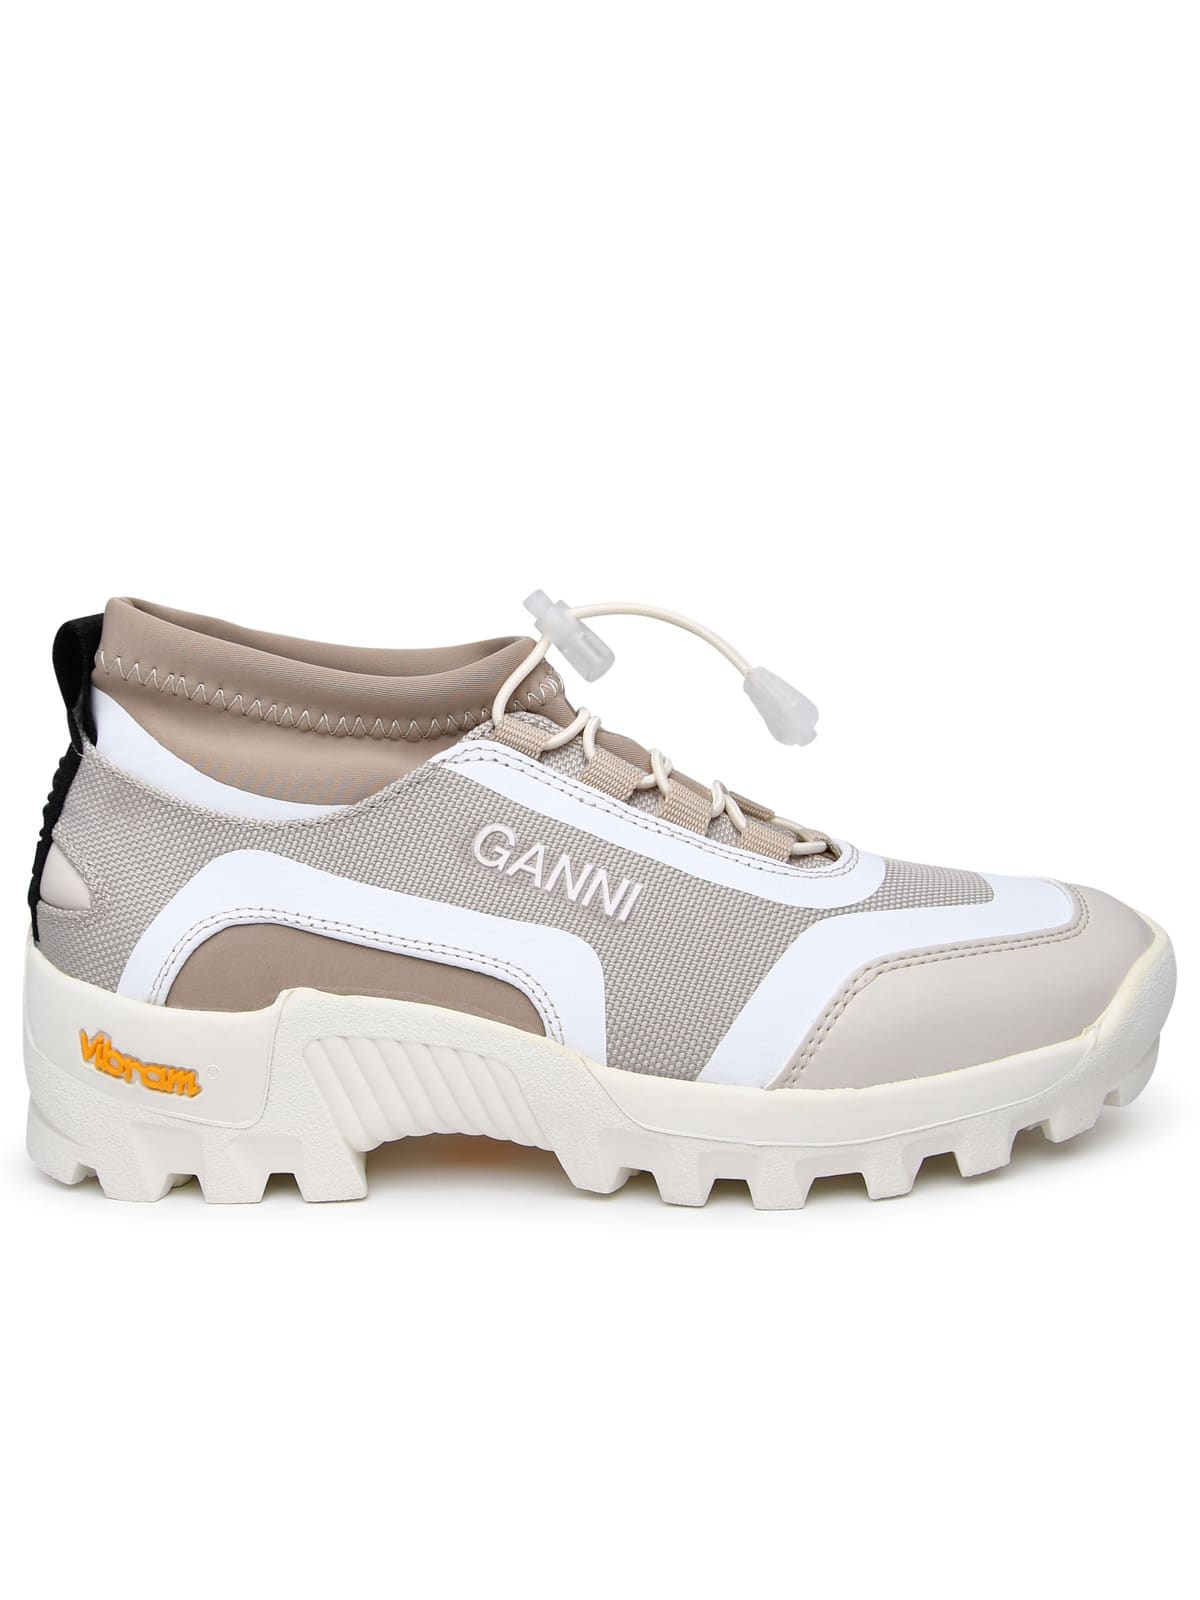 GANNI PERFORMANCE TWO-TONE RECYCLED POLYESTER SNEAKERS